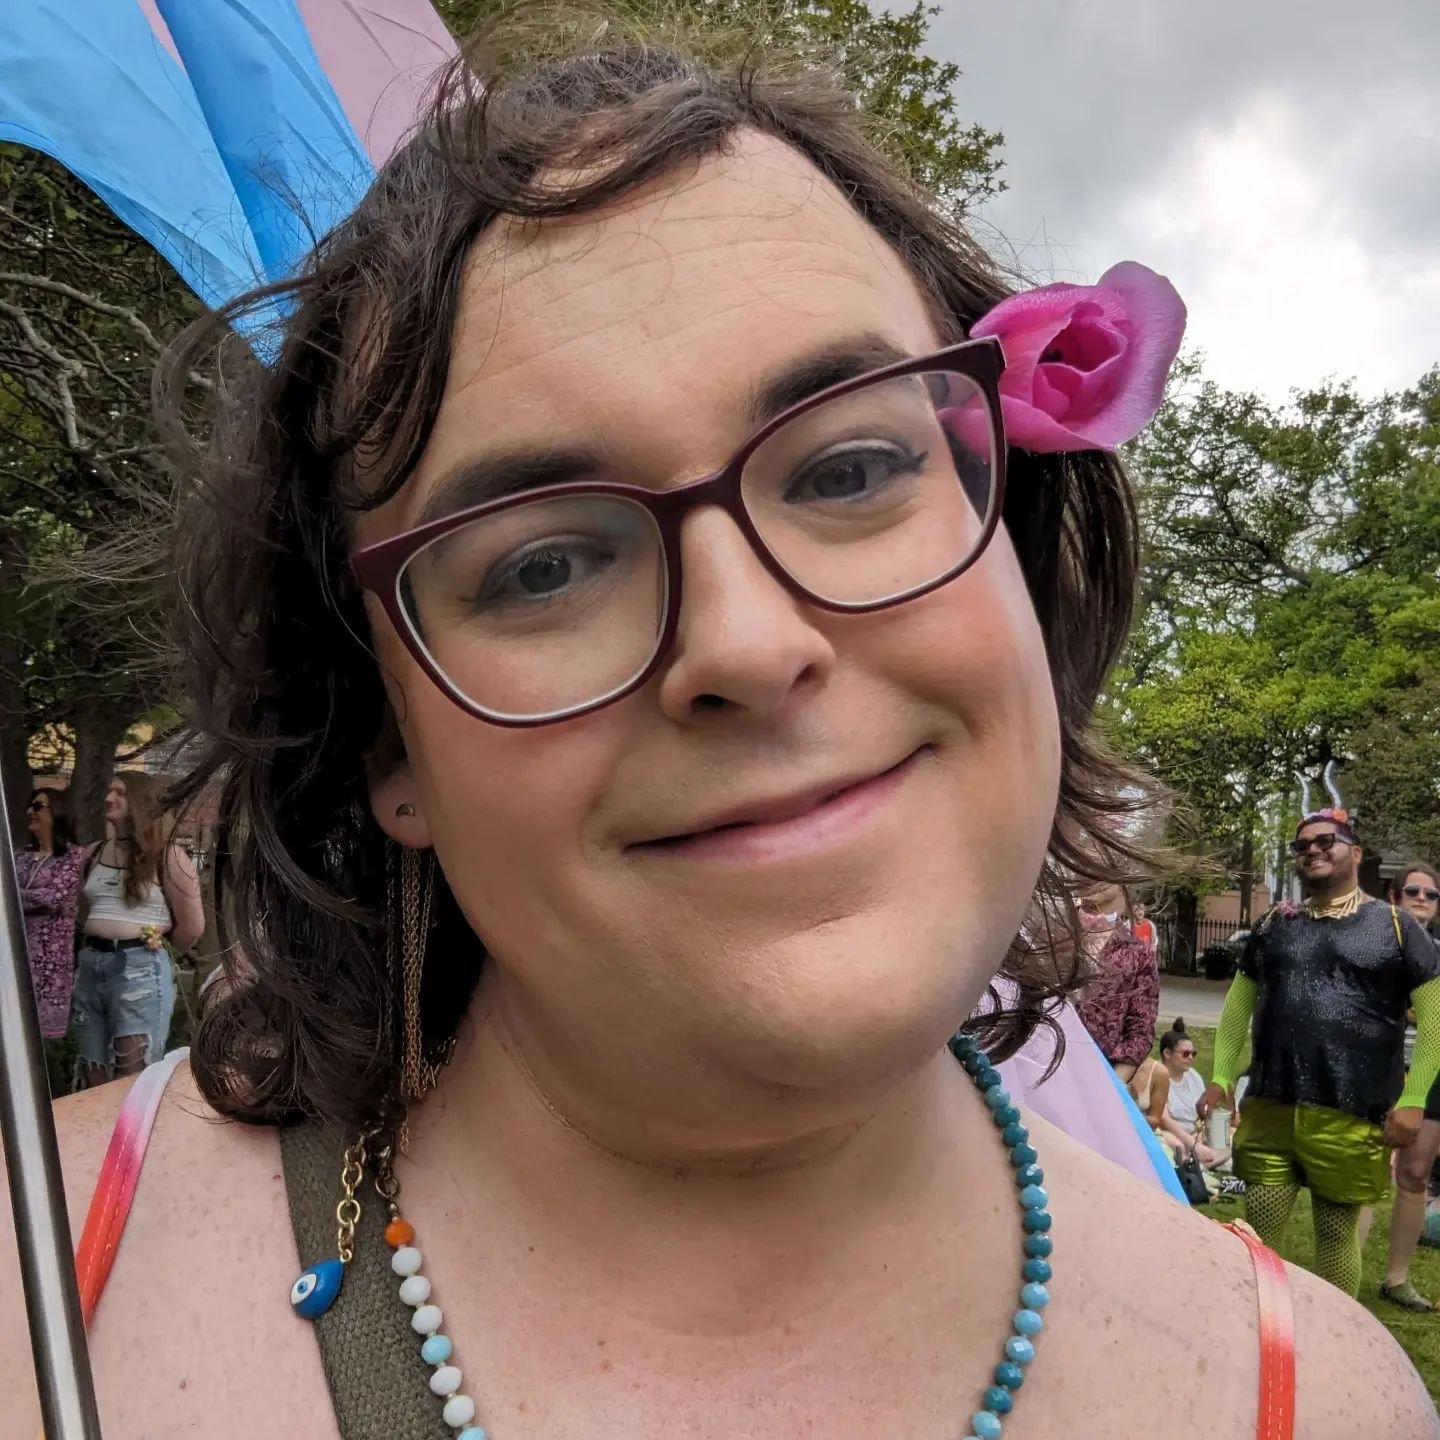 As #TransDayofVisibility comes to an end, I'm happier than ever to live in a city with so many queer and trans people living their lives and fighting the good fight, and where I could fully embrace and be the person I am. Proud to be trans. Proud to 